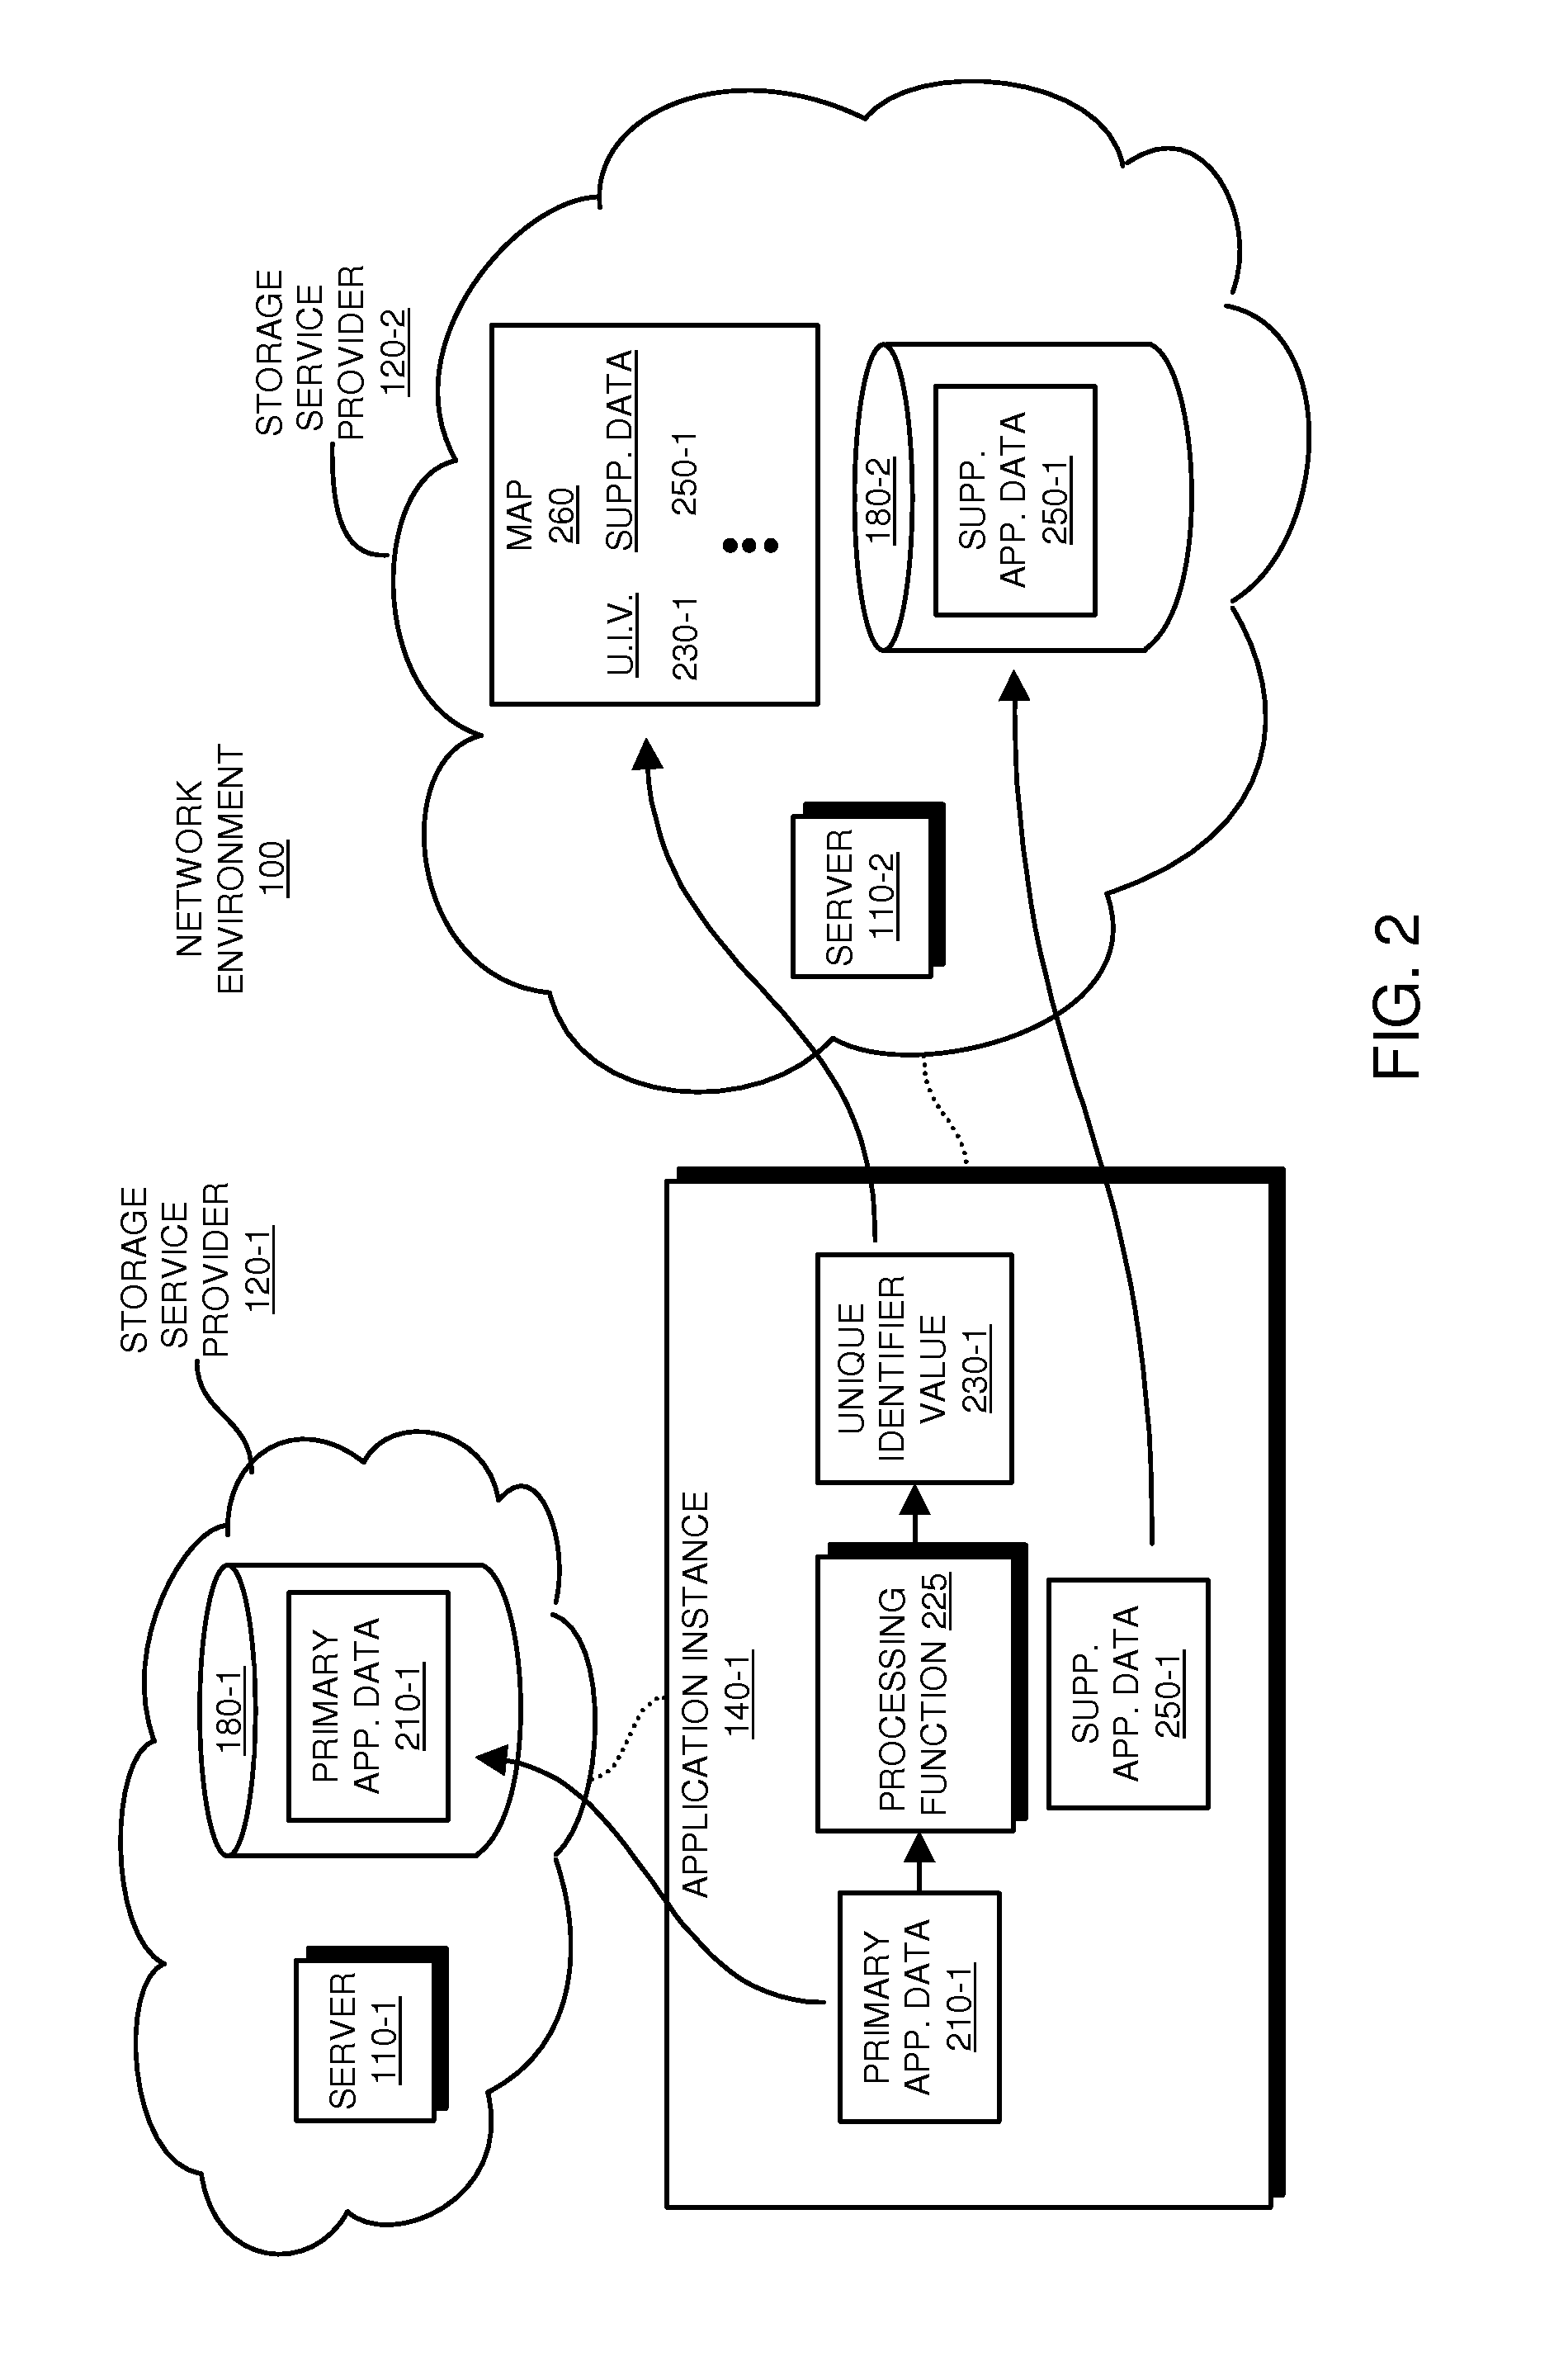 Access to supplemental data based on identifier derived from corresponding primary application data